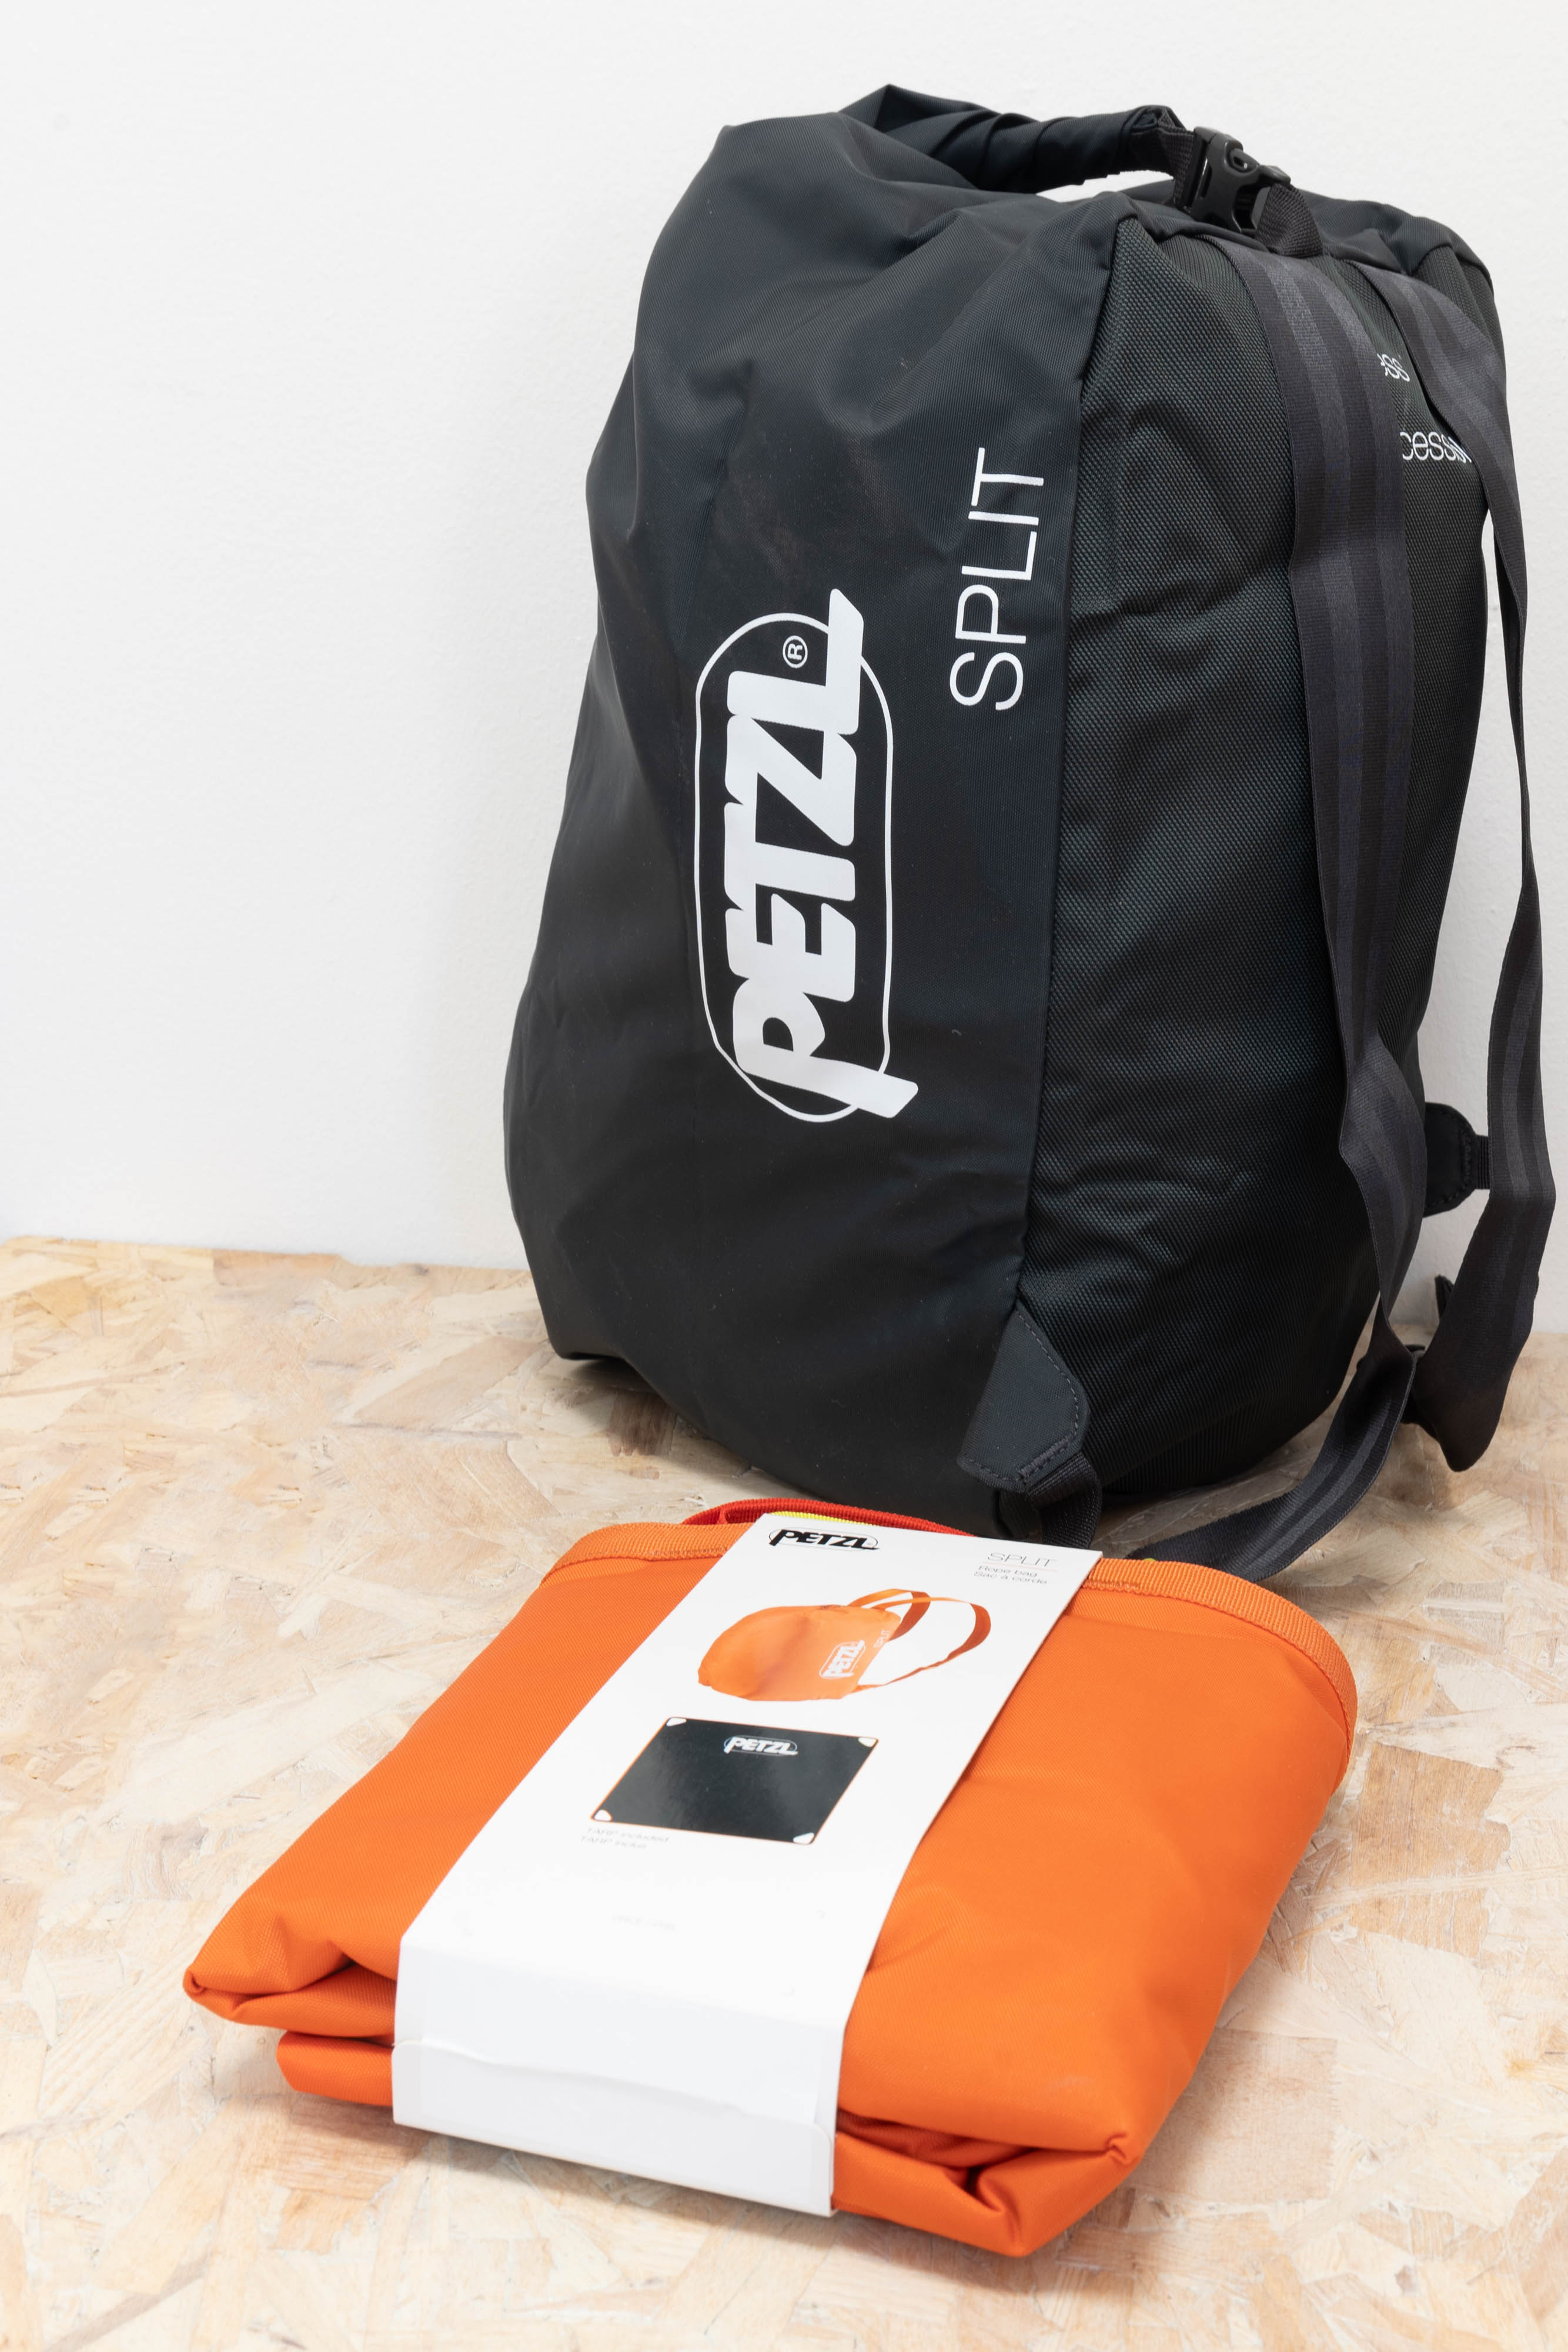 BUG Backpack by Petzl - Overview by WesSpur's Niceguydave - YouTube